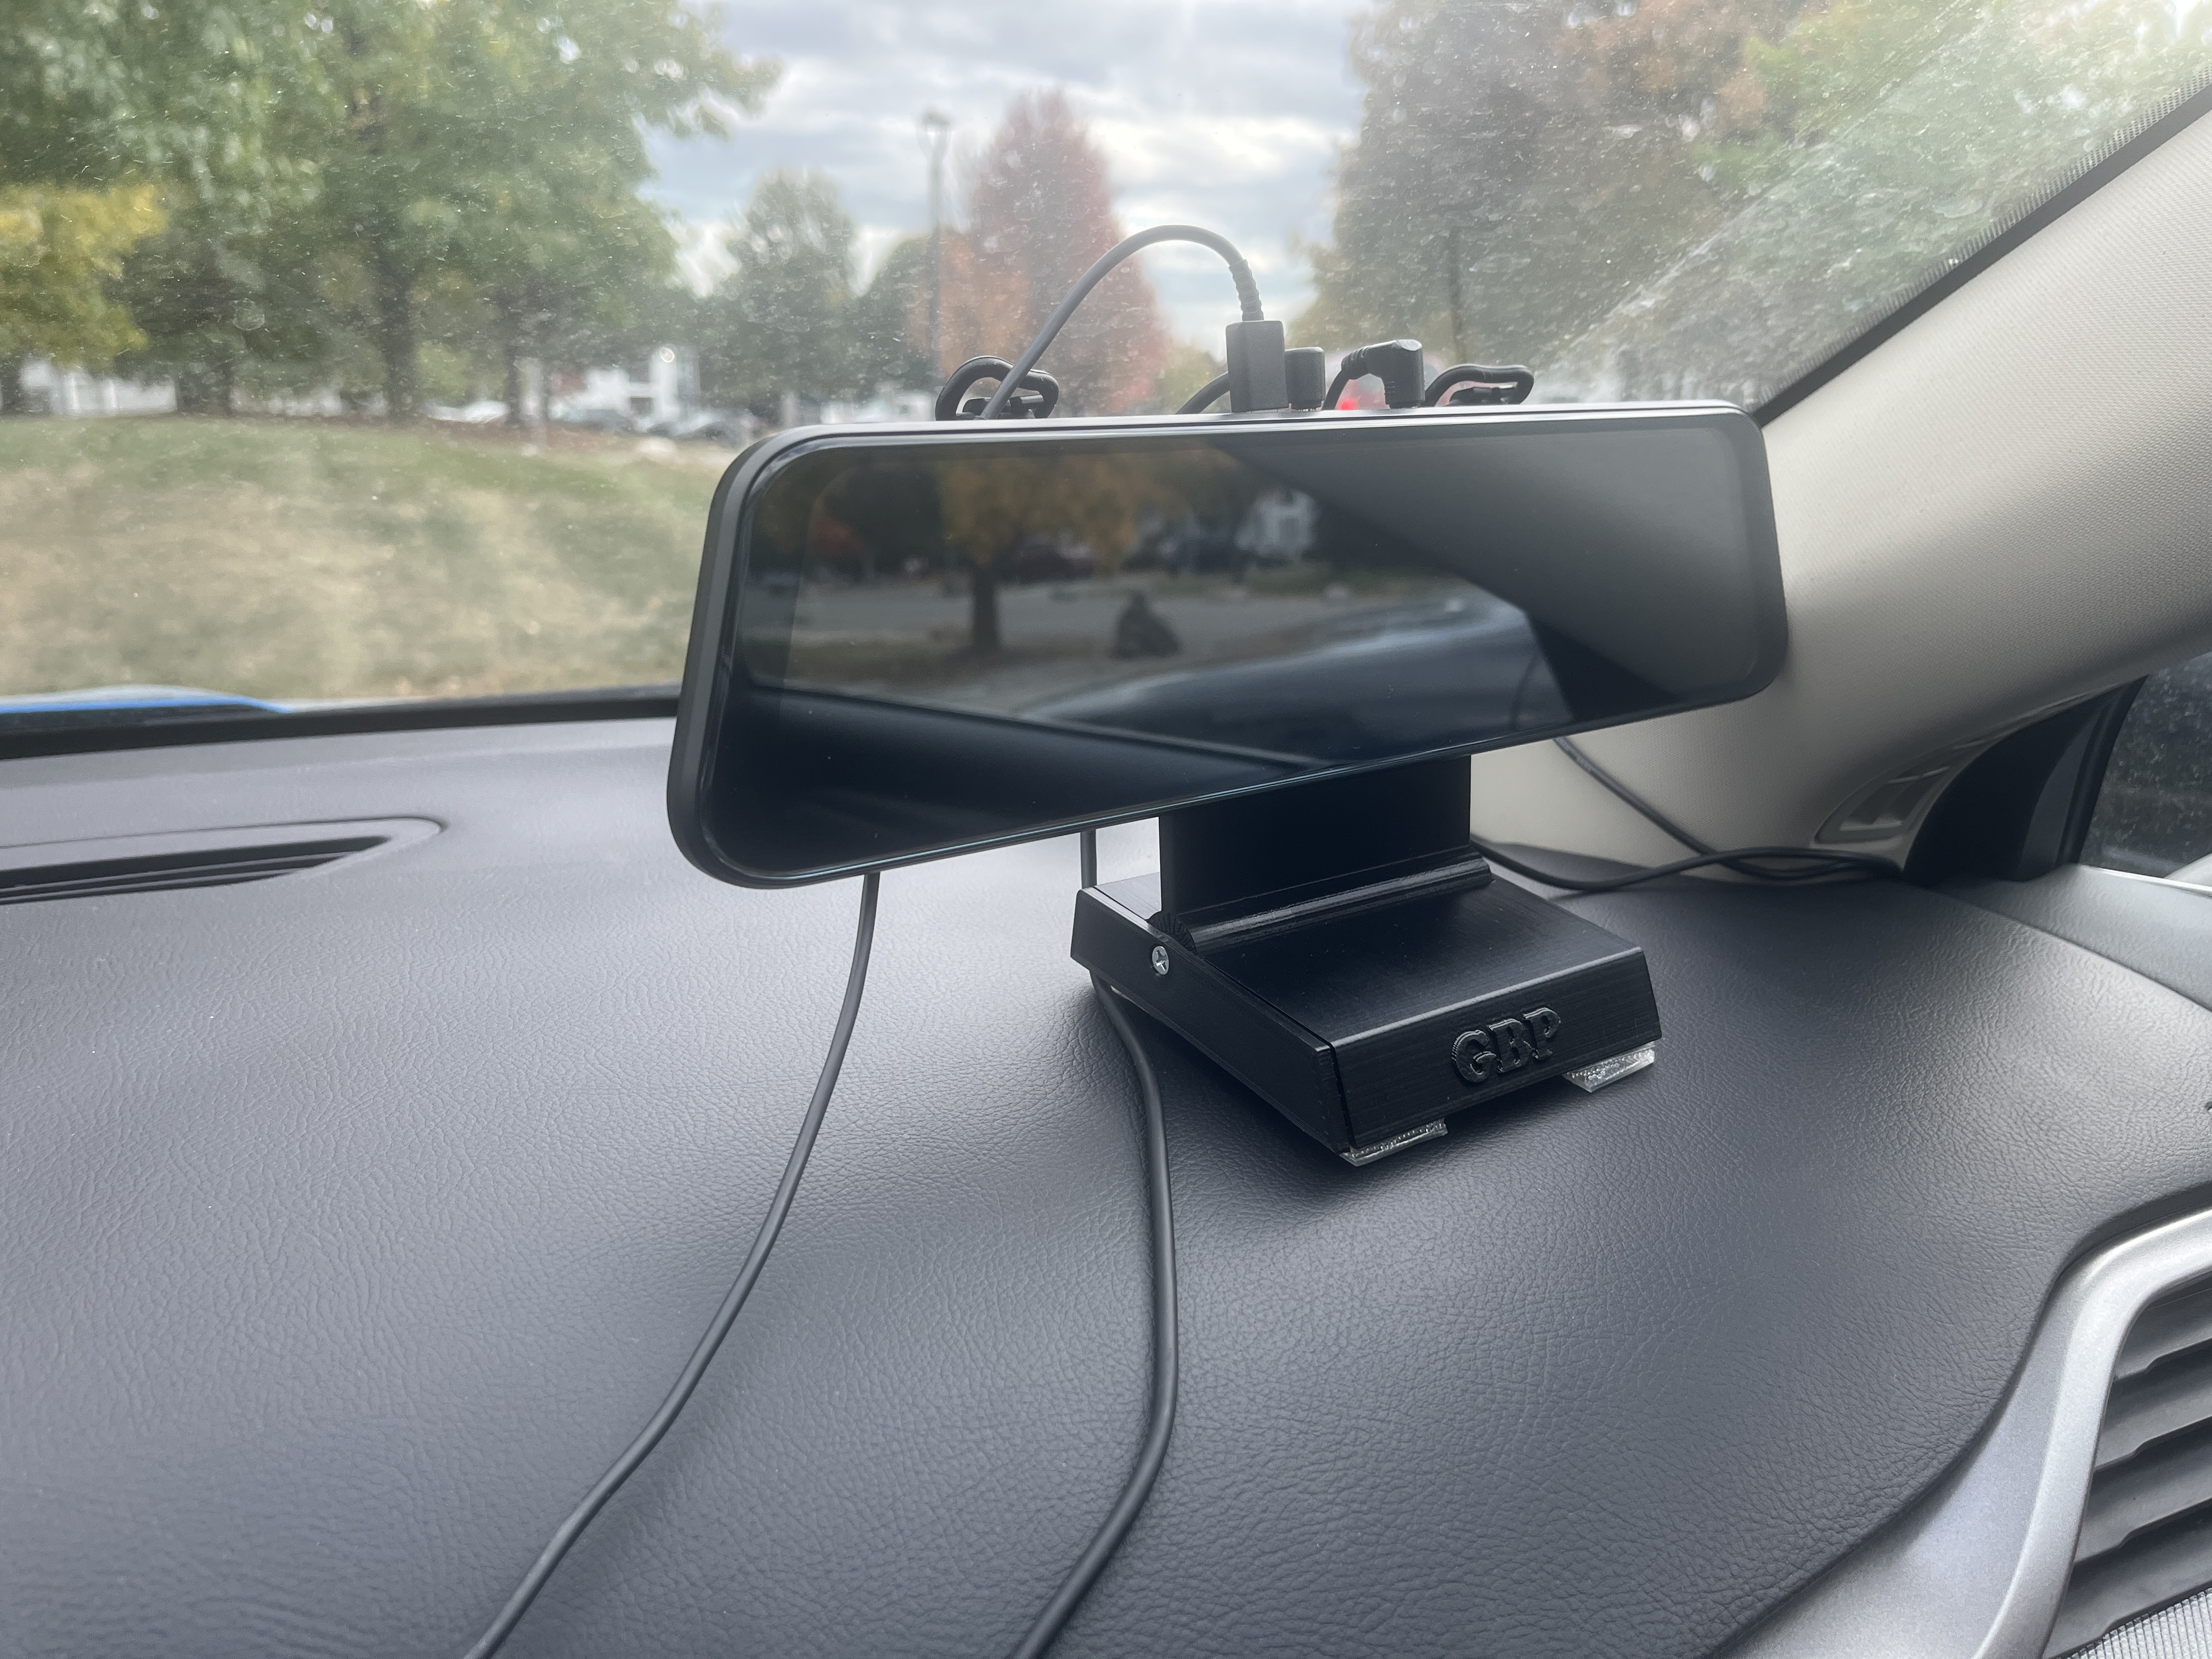 Adjustable center console mount for a rear view mirror style dash camera.